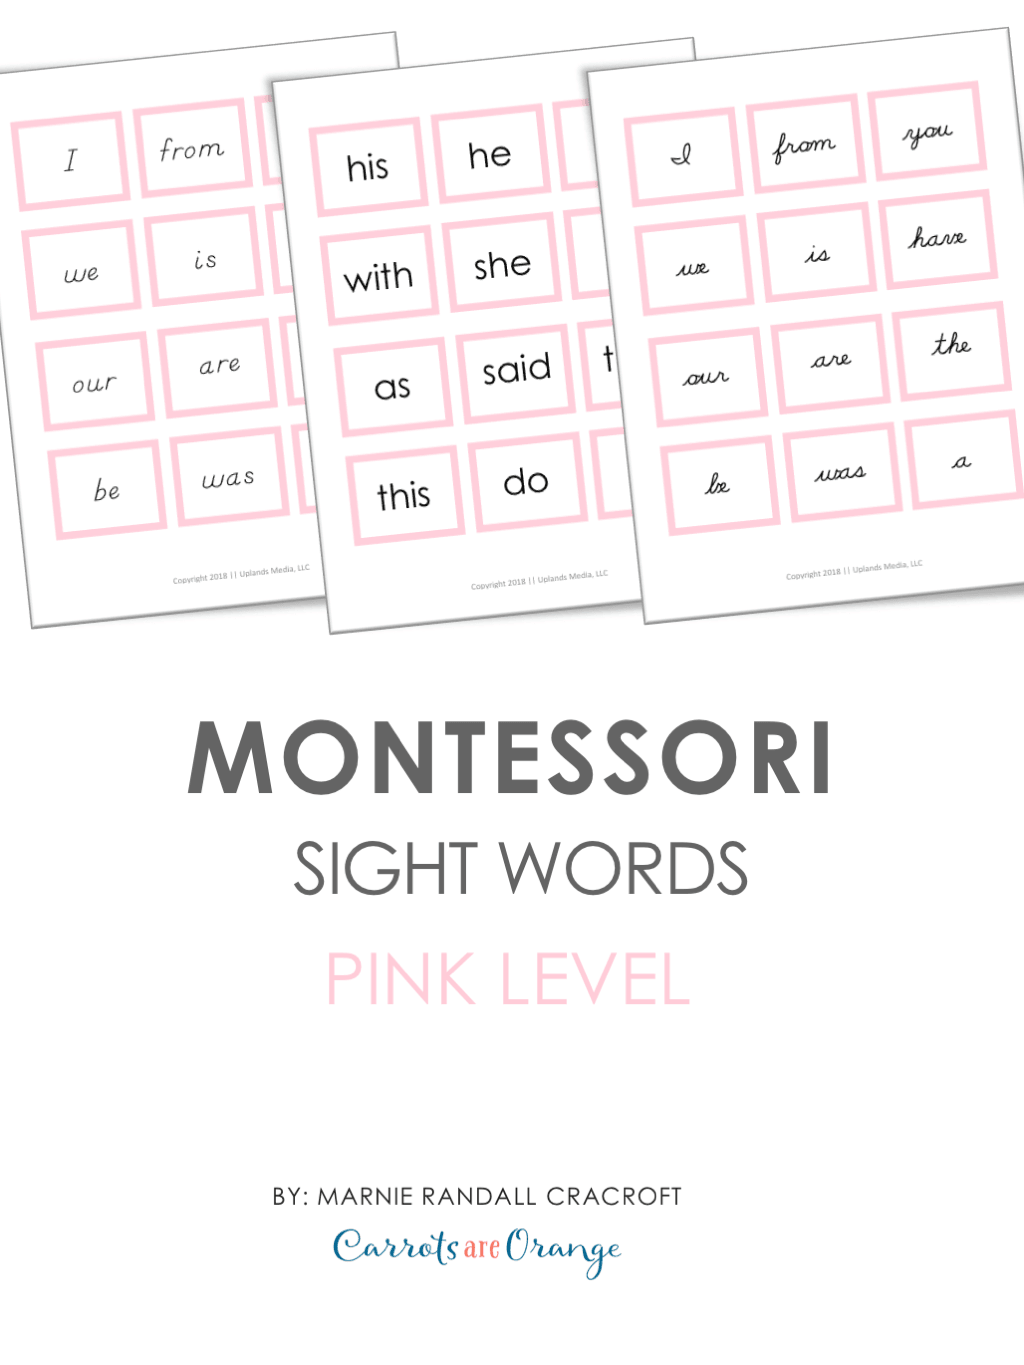 [Pink Level] Sight Word Cards - Printables by Carrots Are Orange